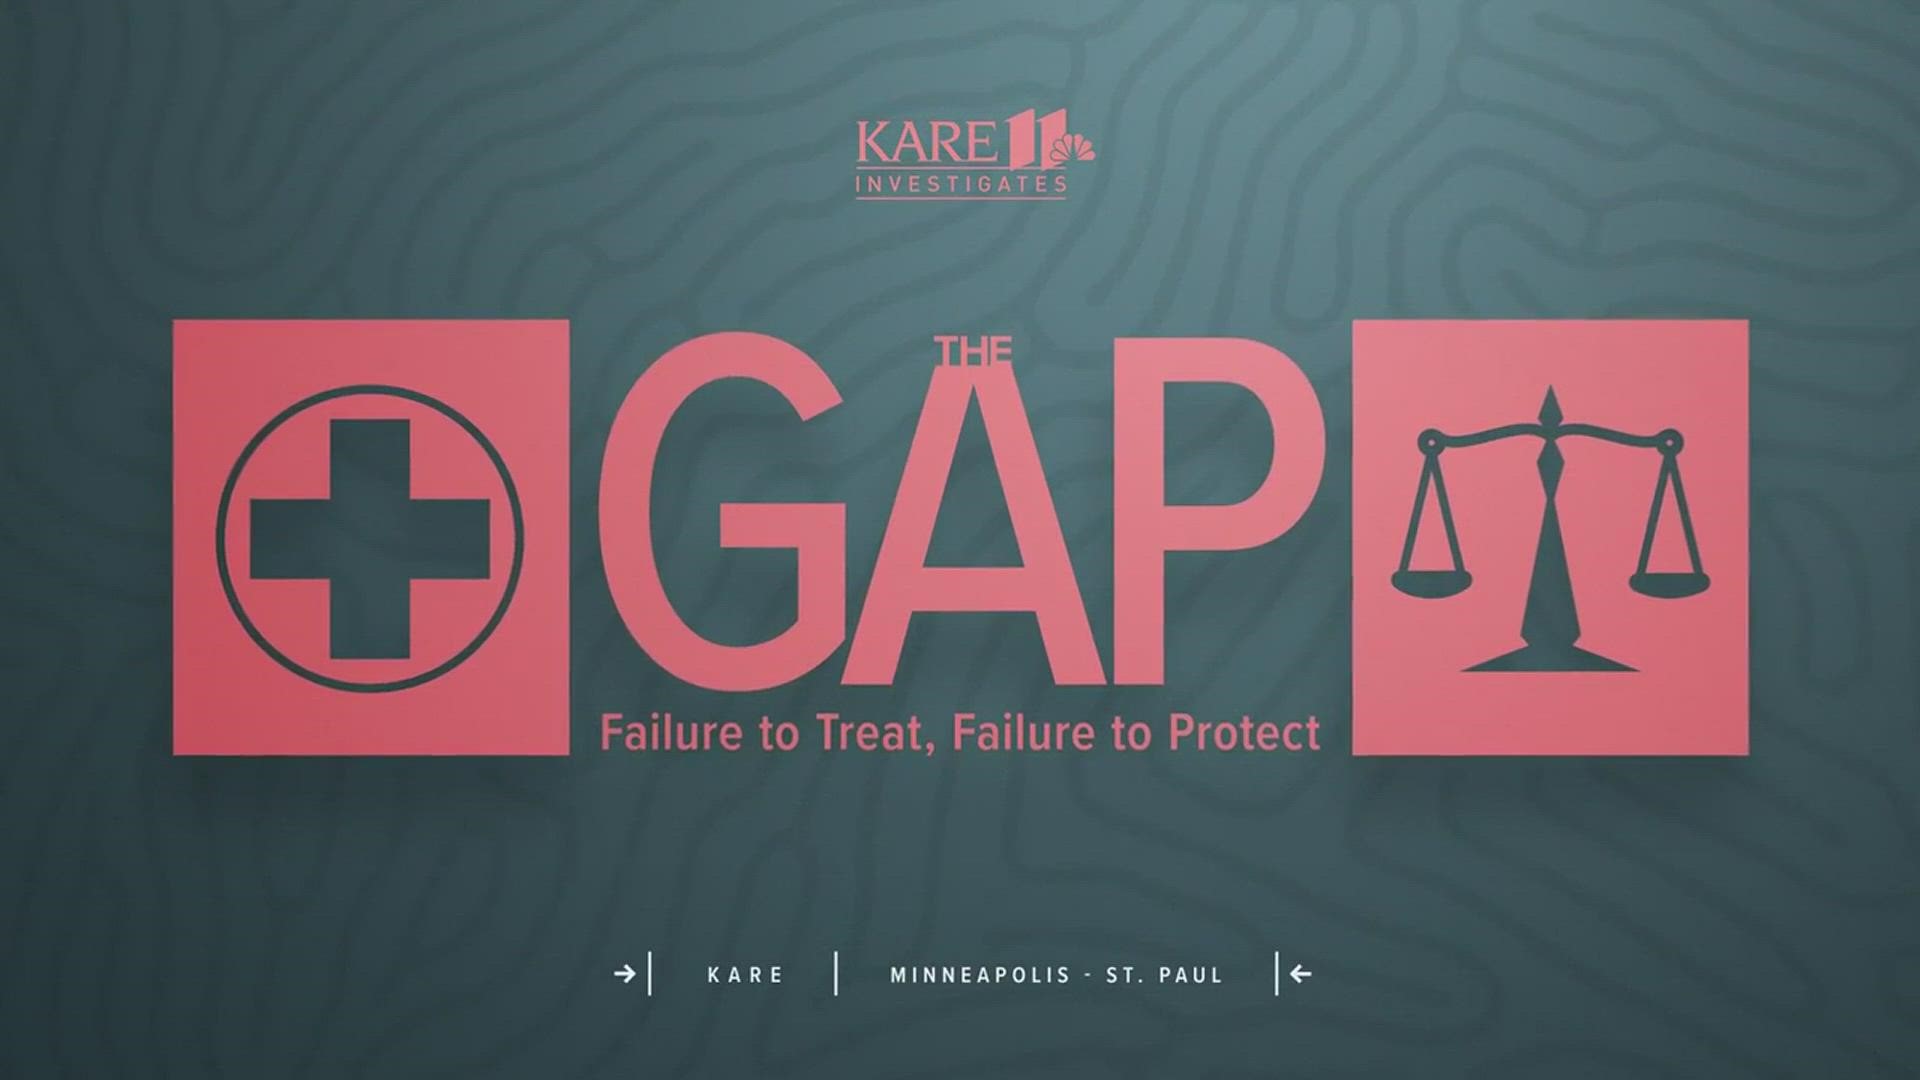 The KARE 11 Investigates team shows how mentally ill suspects charged with crimes go untreated, and the public goes unprotected.